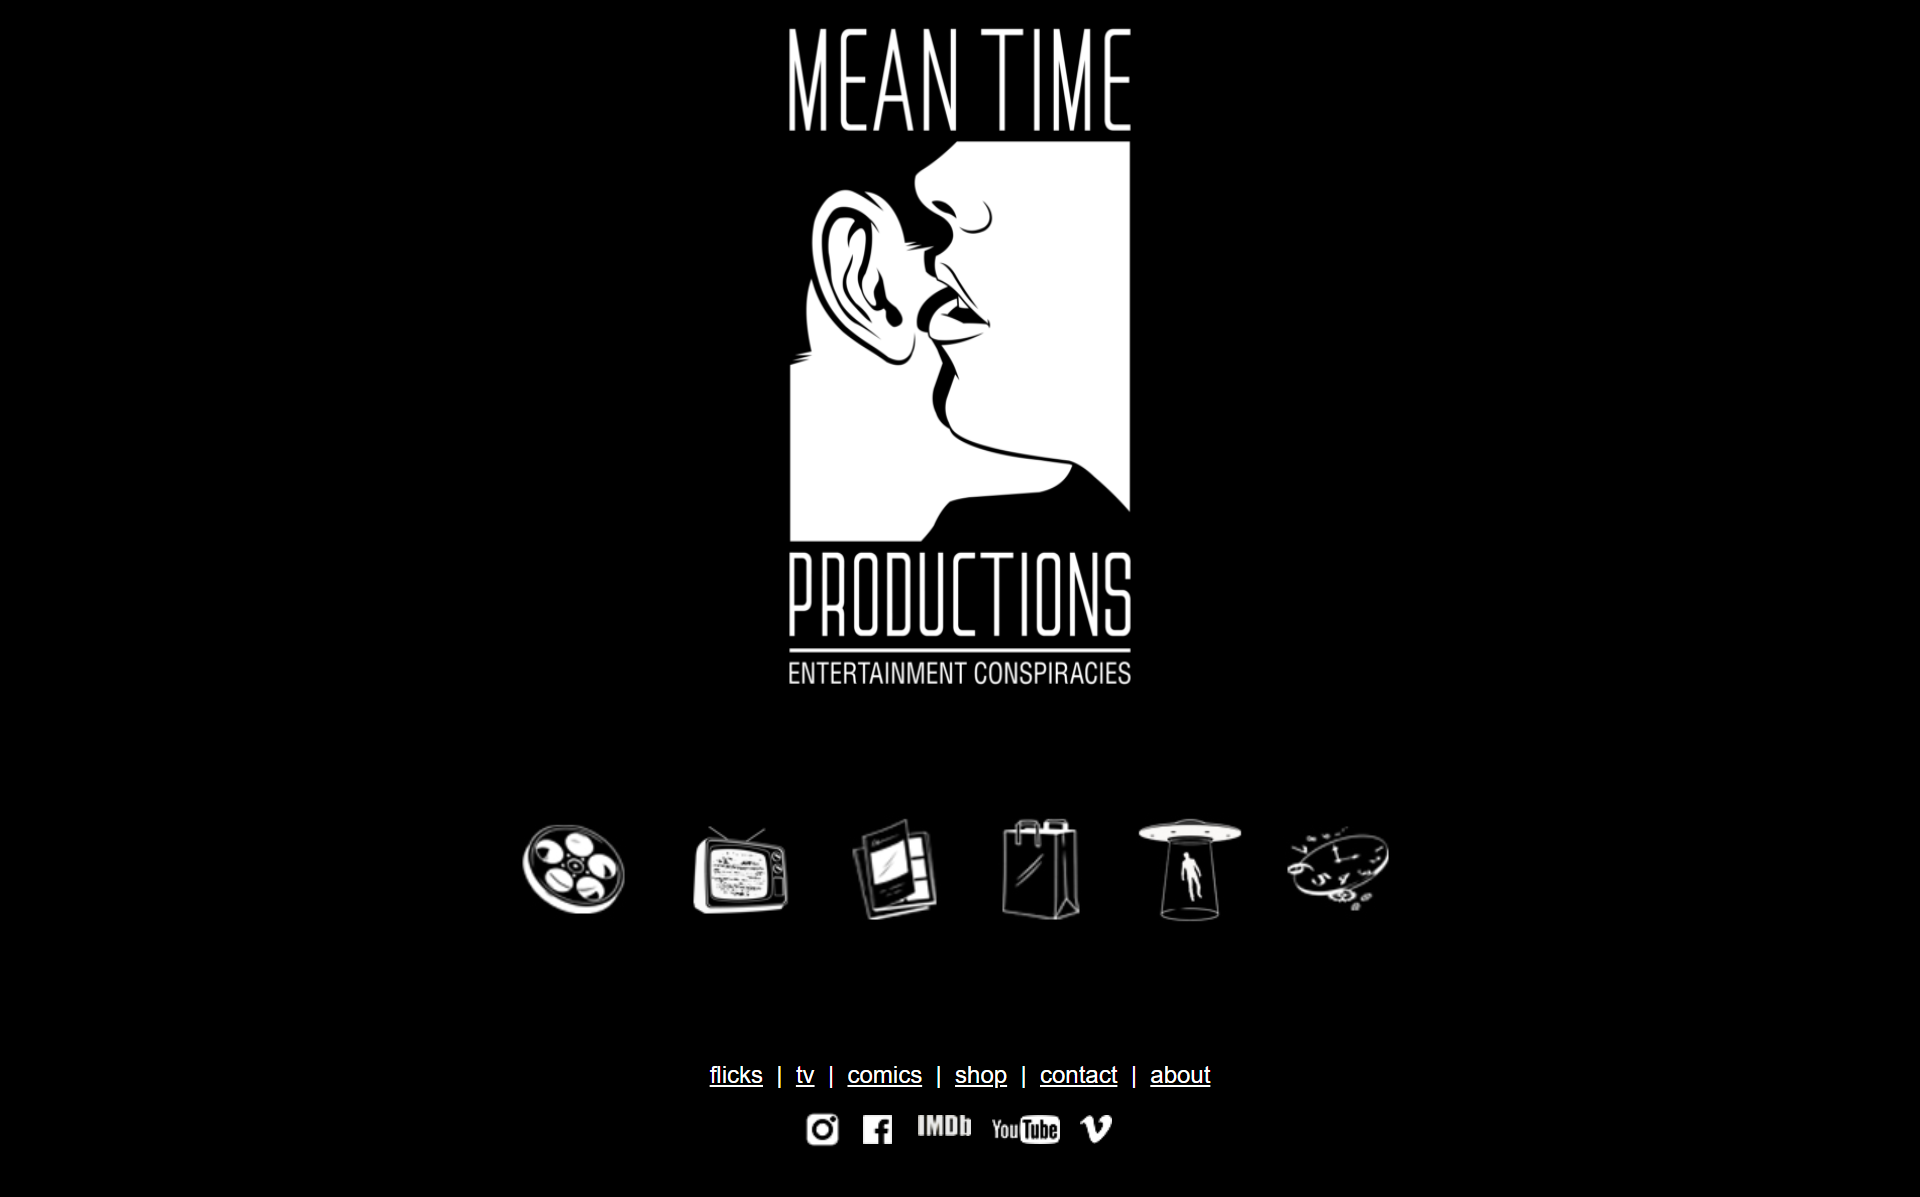 Mean Time Productions homepage screenshot